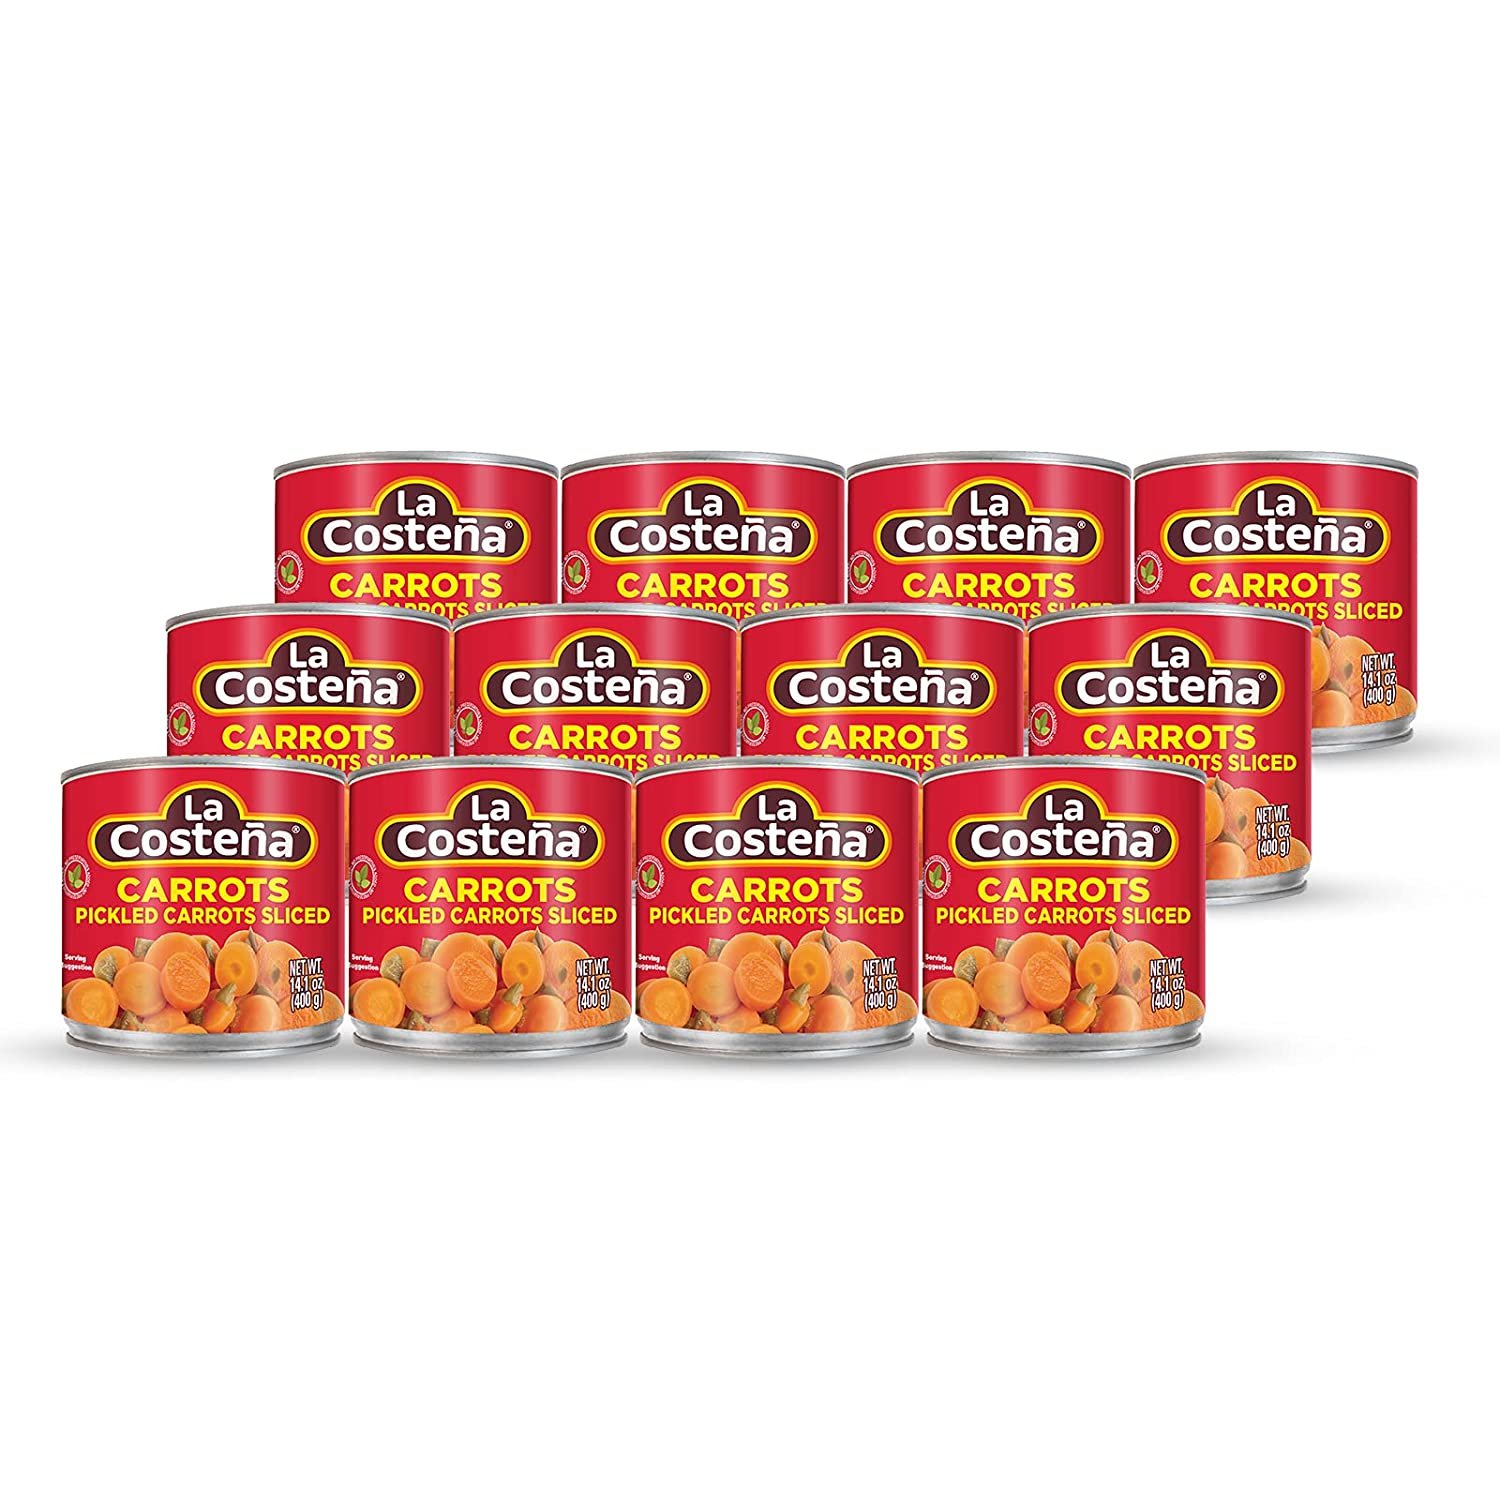 Sliced Pickled Carrots, 14.1 Ounce Can (Pack of 12) La costena